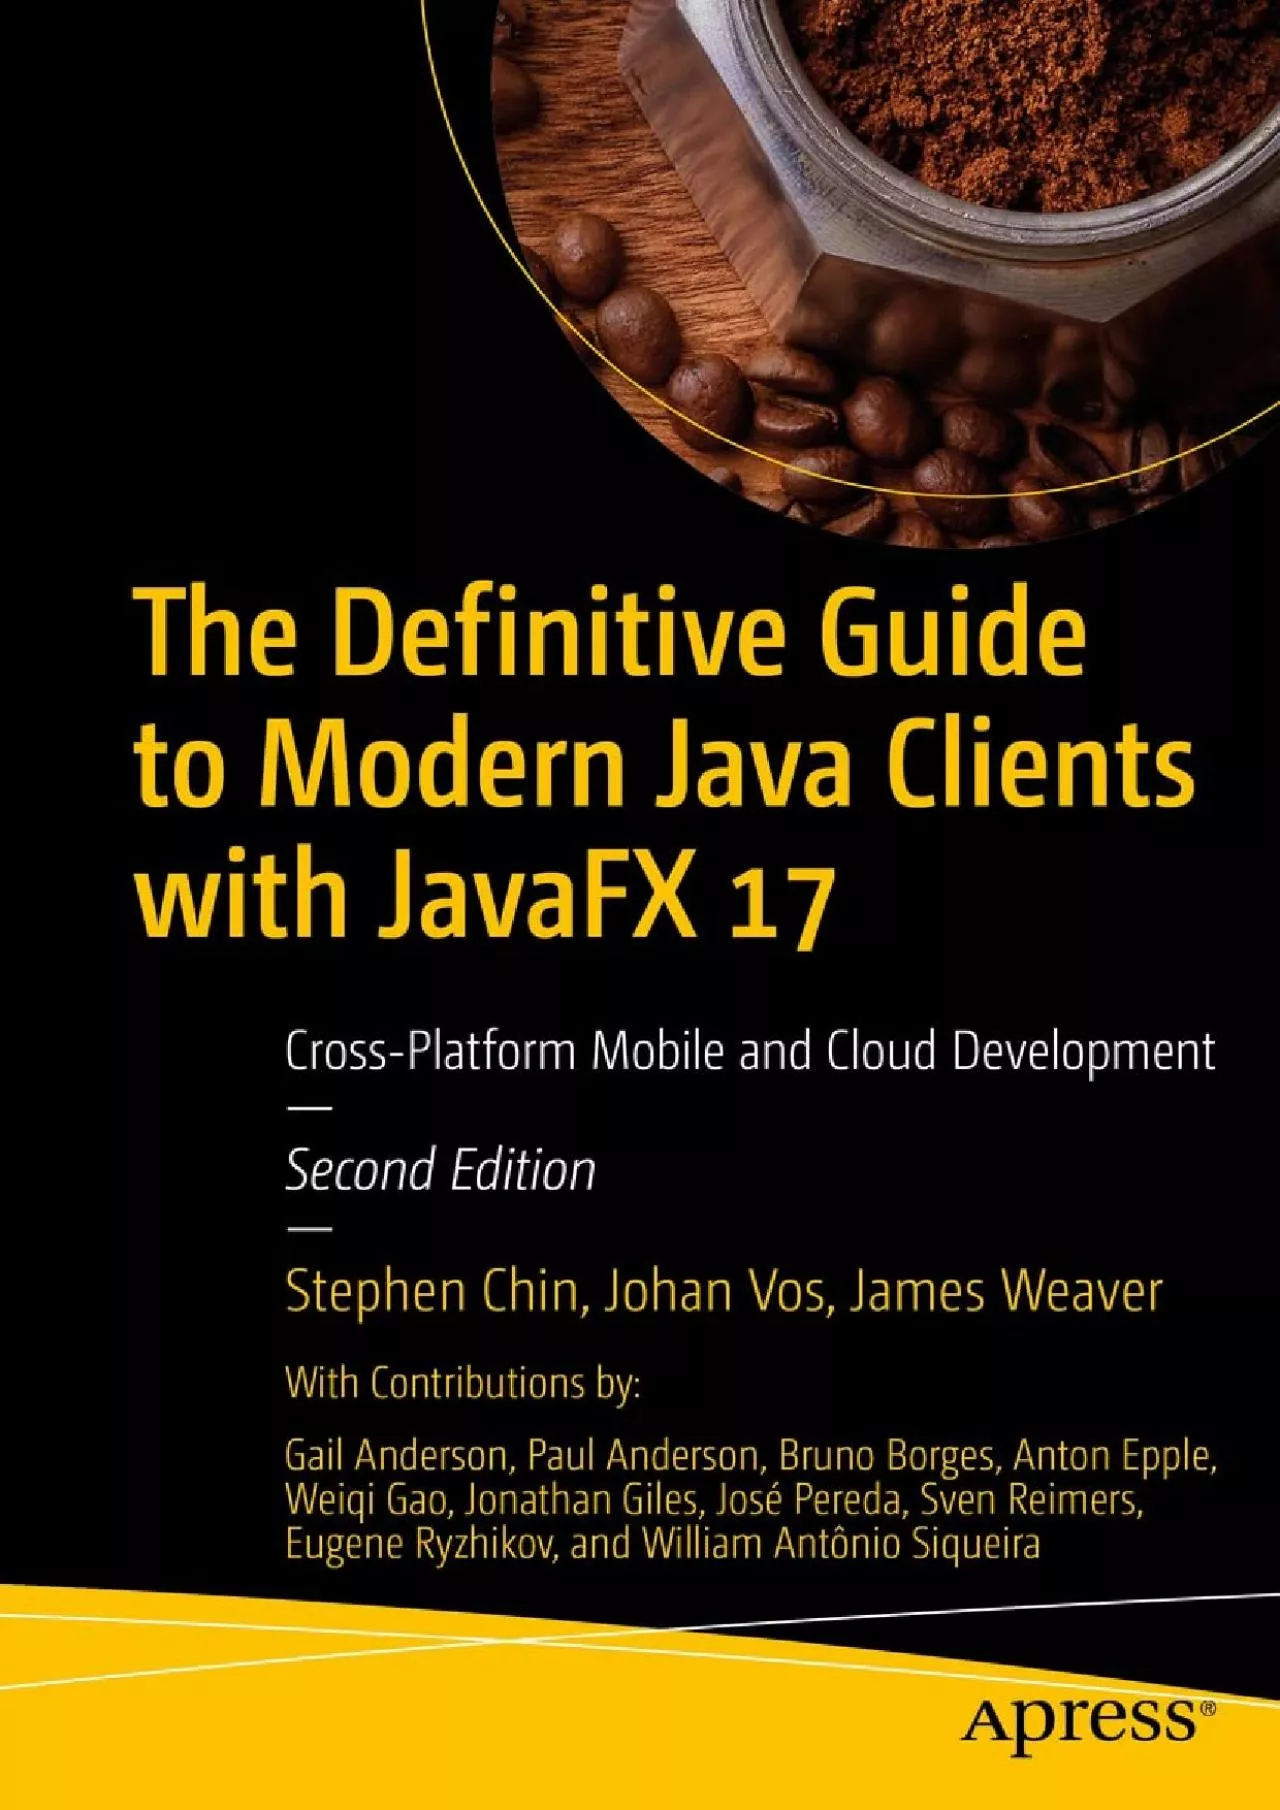 [DOWLOAD]-The Definitive Guide to Modern Java Clients with JavaFX 17: Cross-Platform Mobile